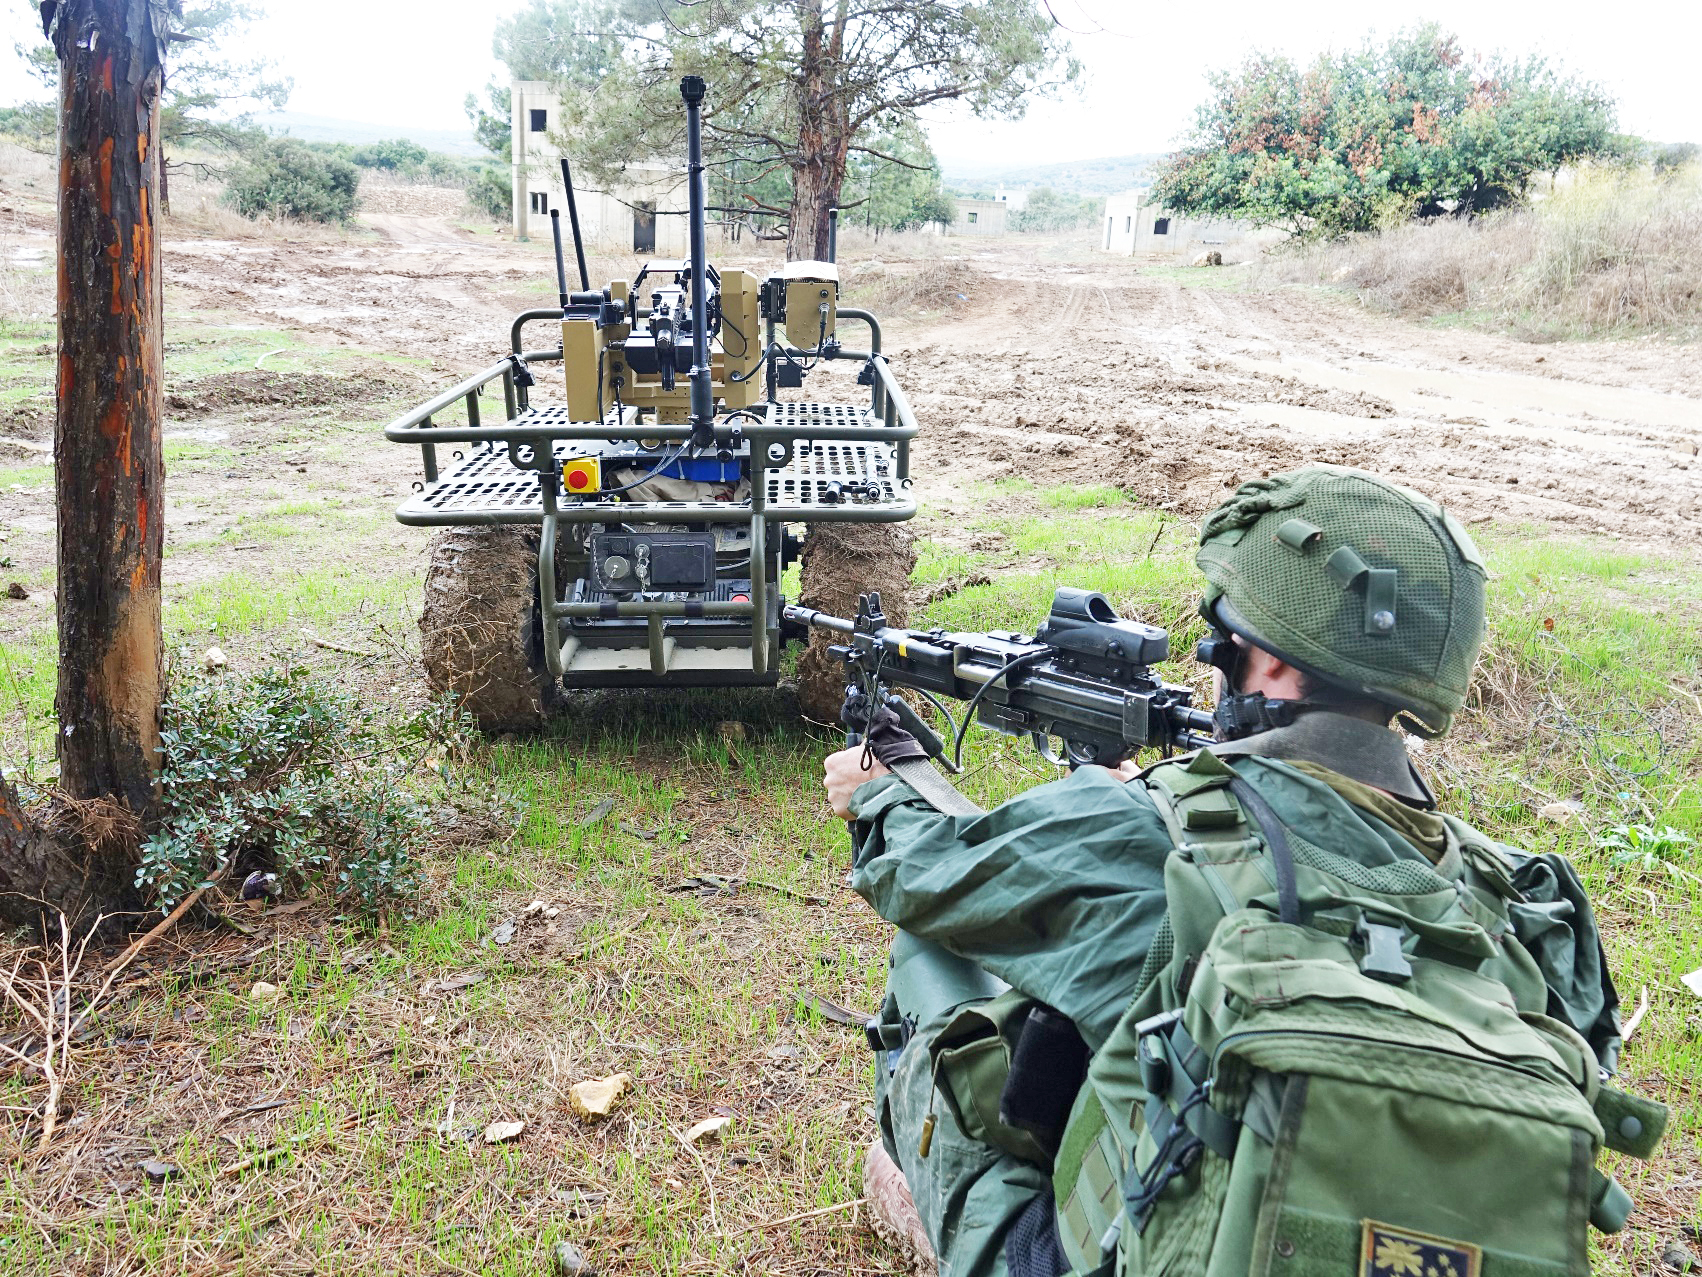 Elbit Systems to lead a Human-Robot Interaction consortium